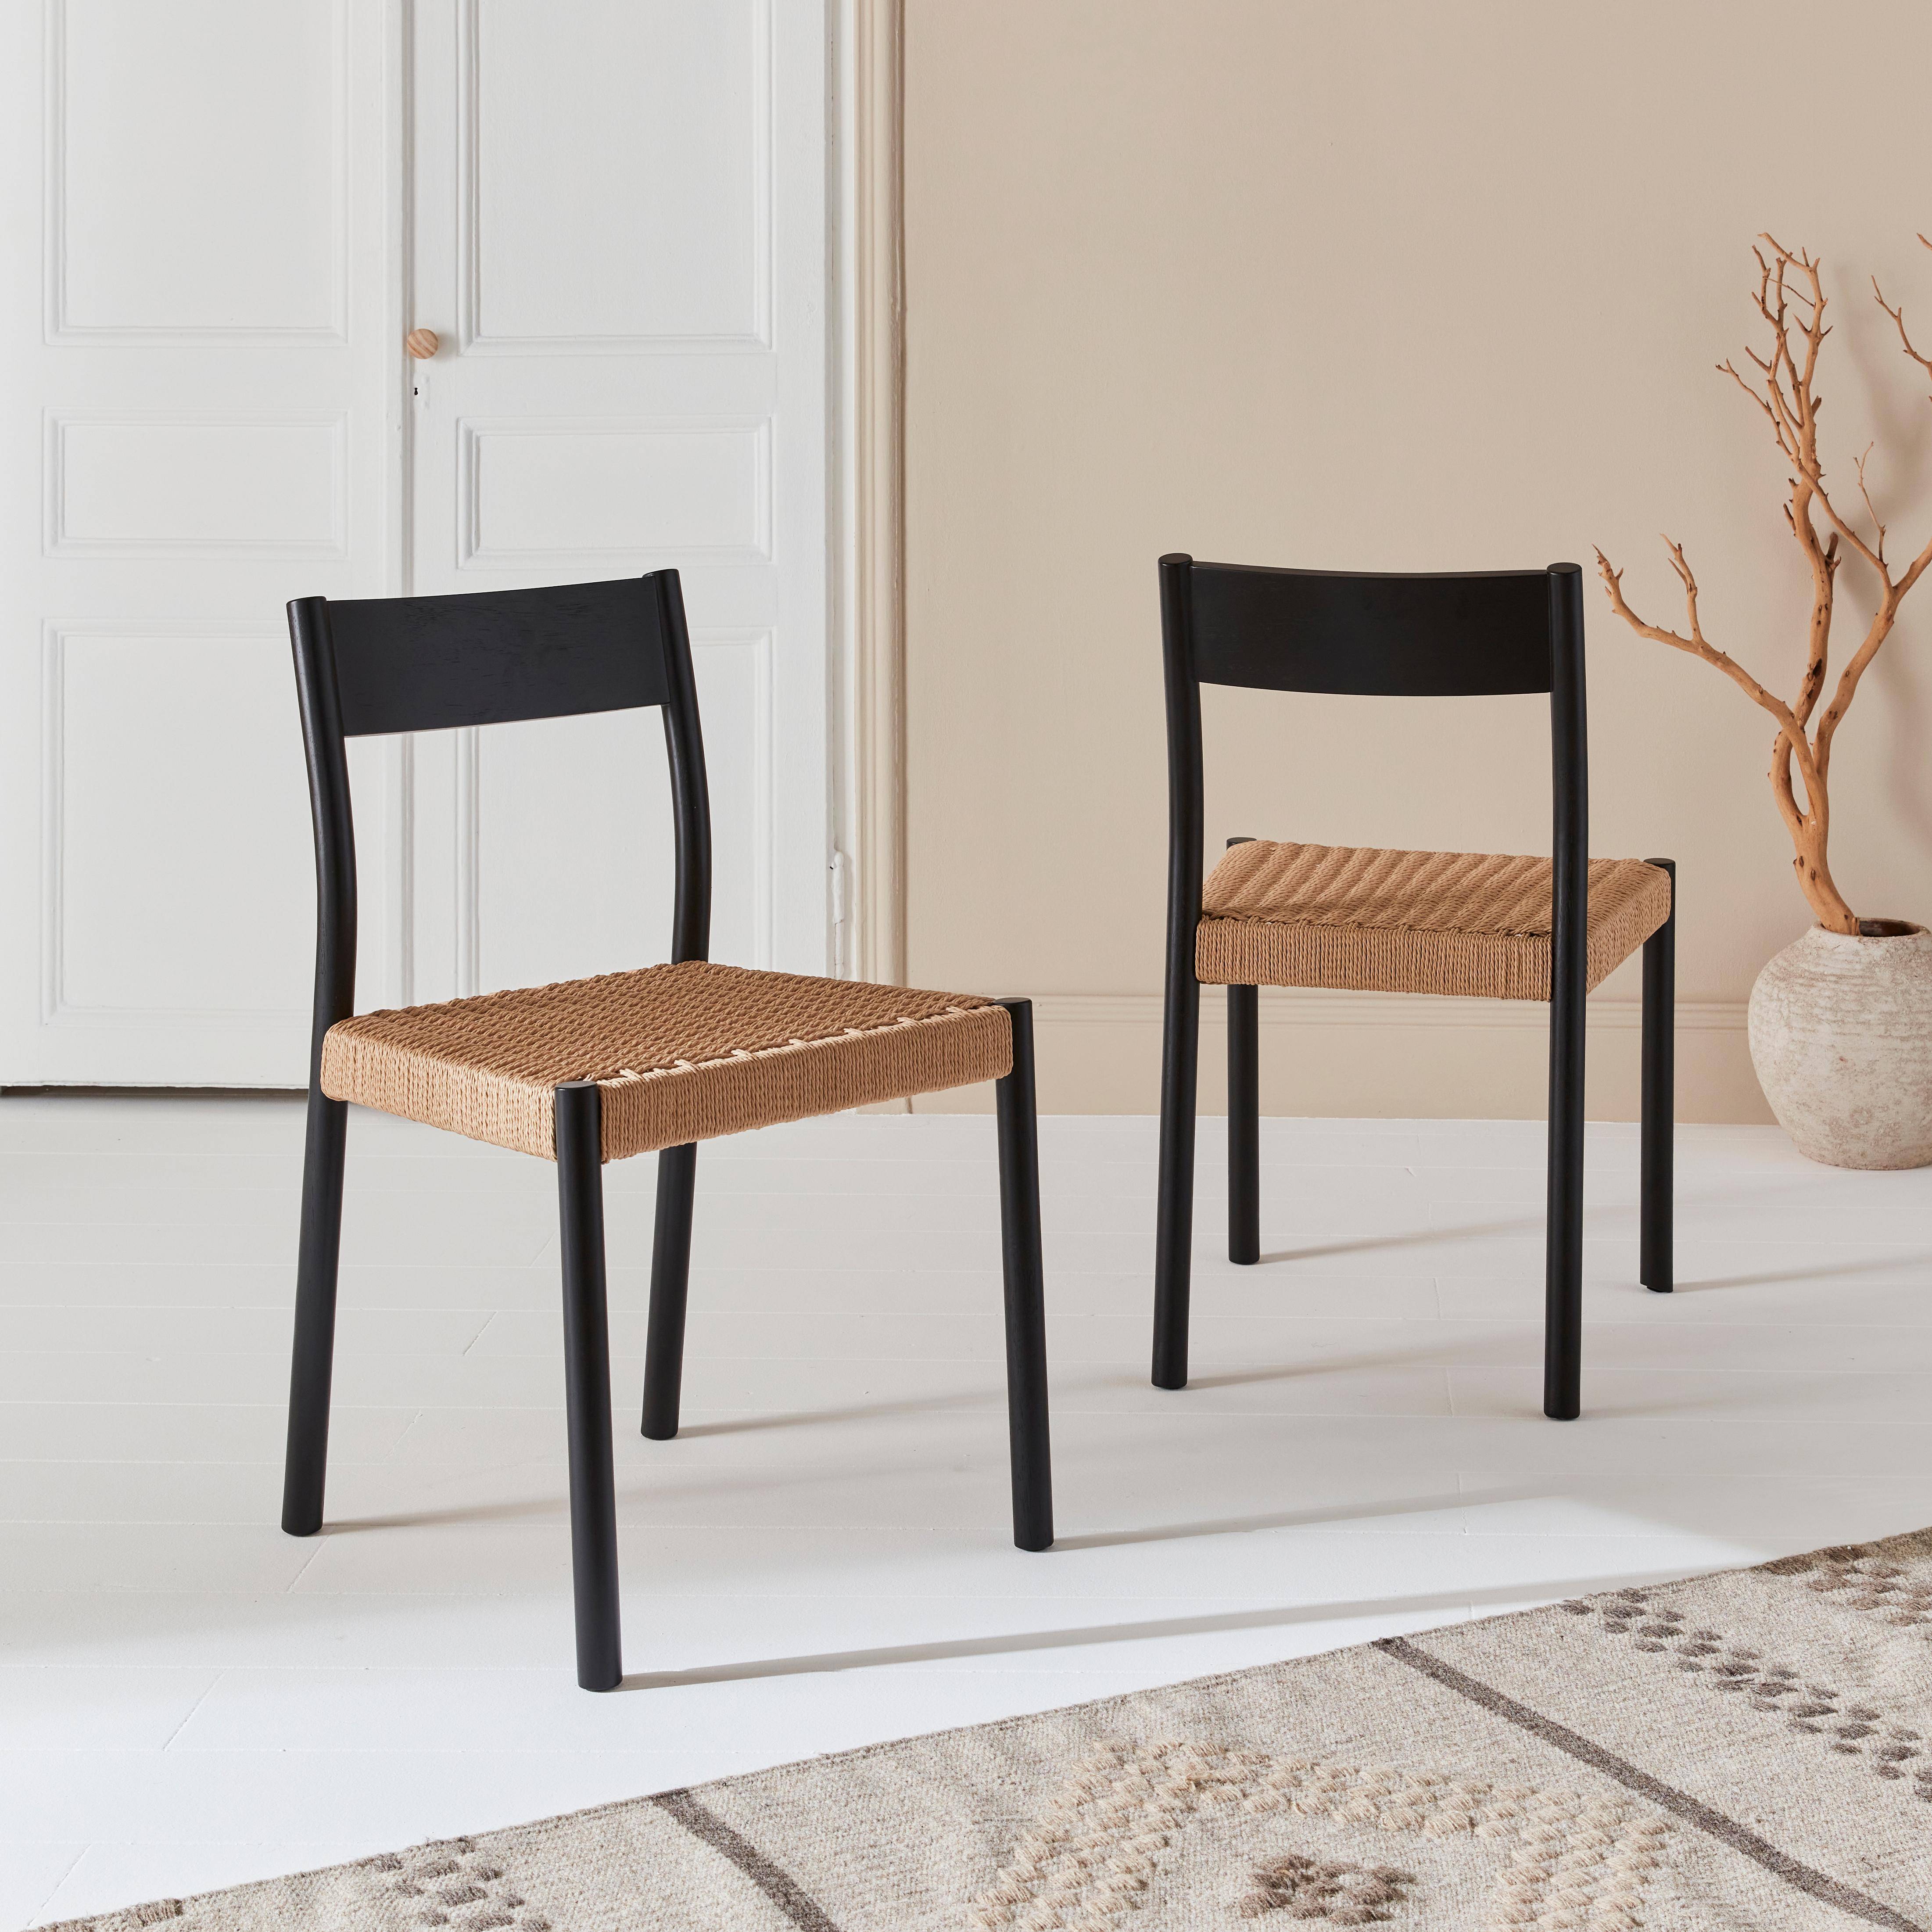 Pair of timeless design Wood and Rope Dining Room chairs, L49.5 x W53 x H82 cm, black Photo1